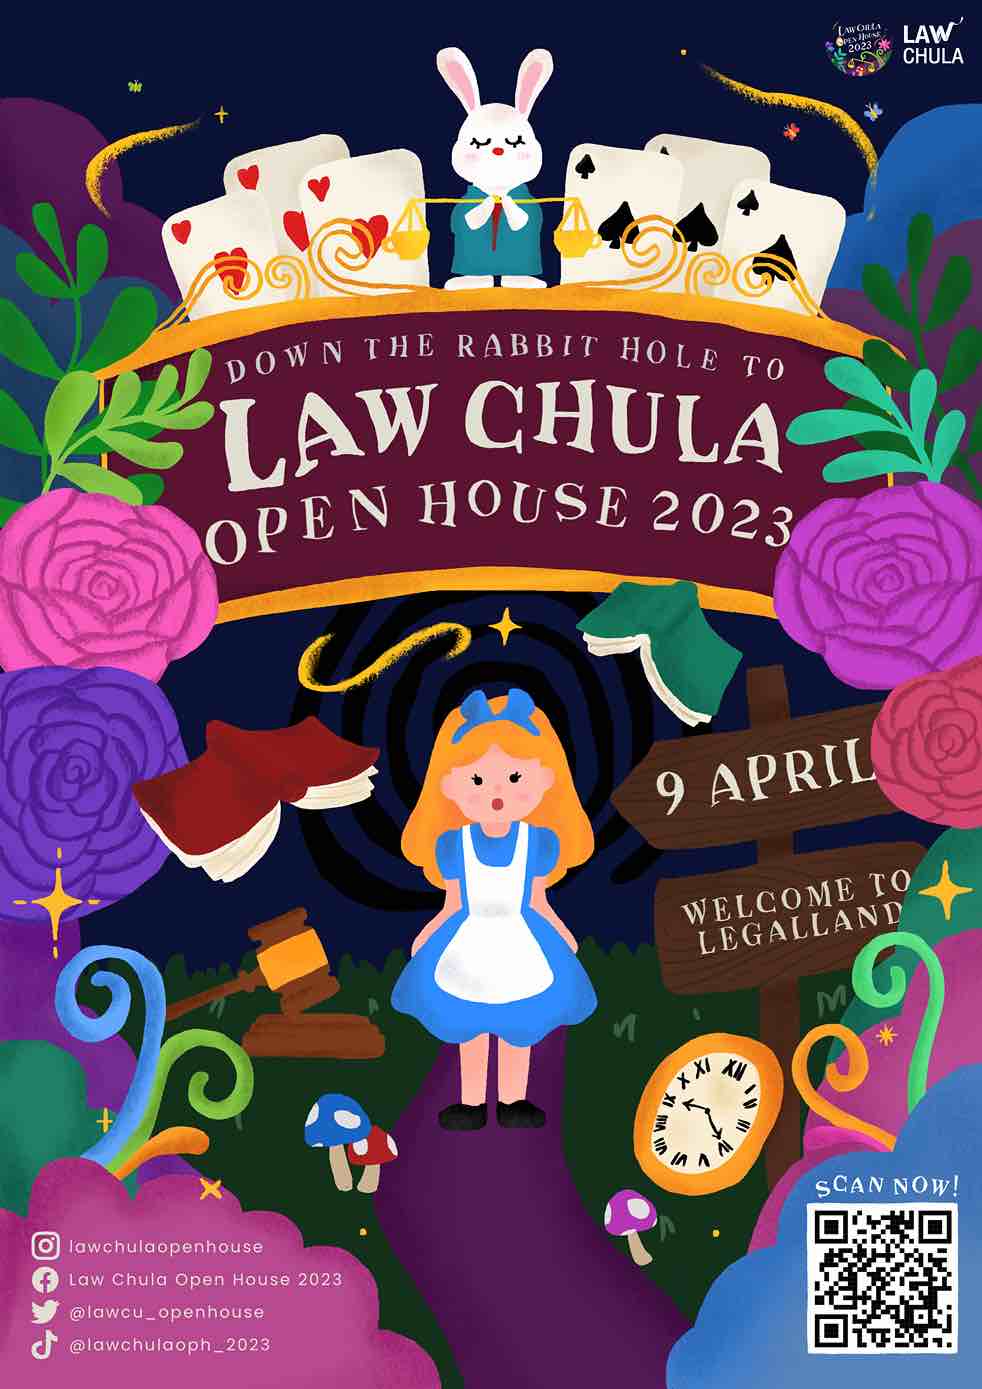 Law Chula Open House 2023